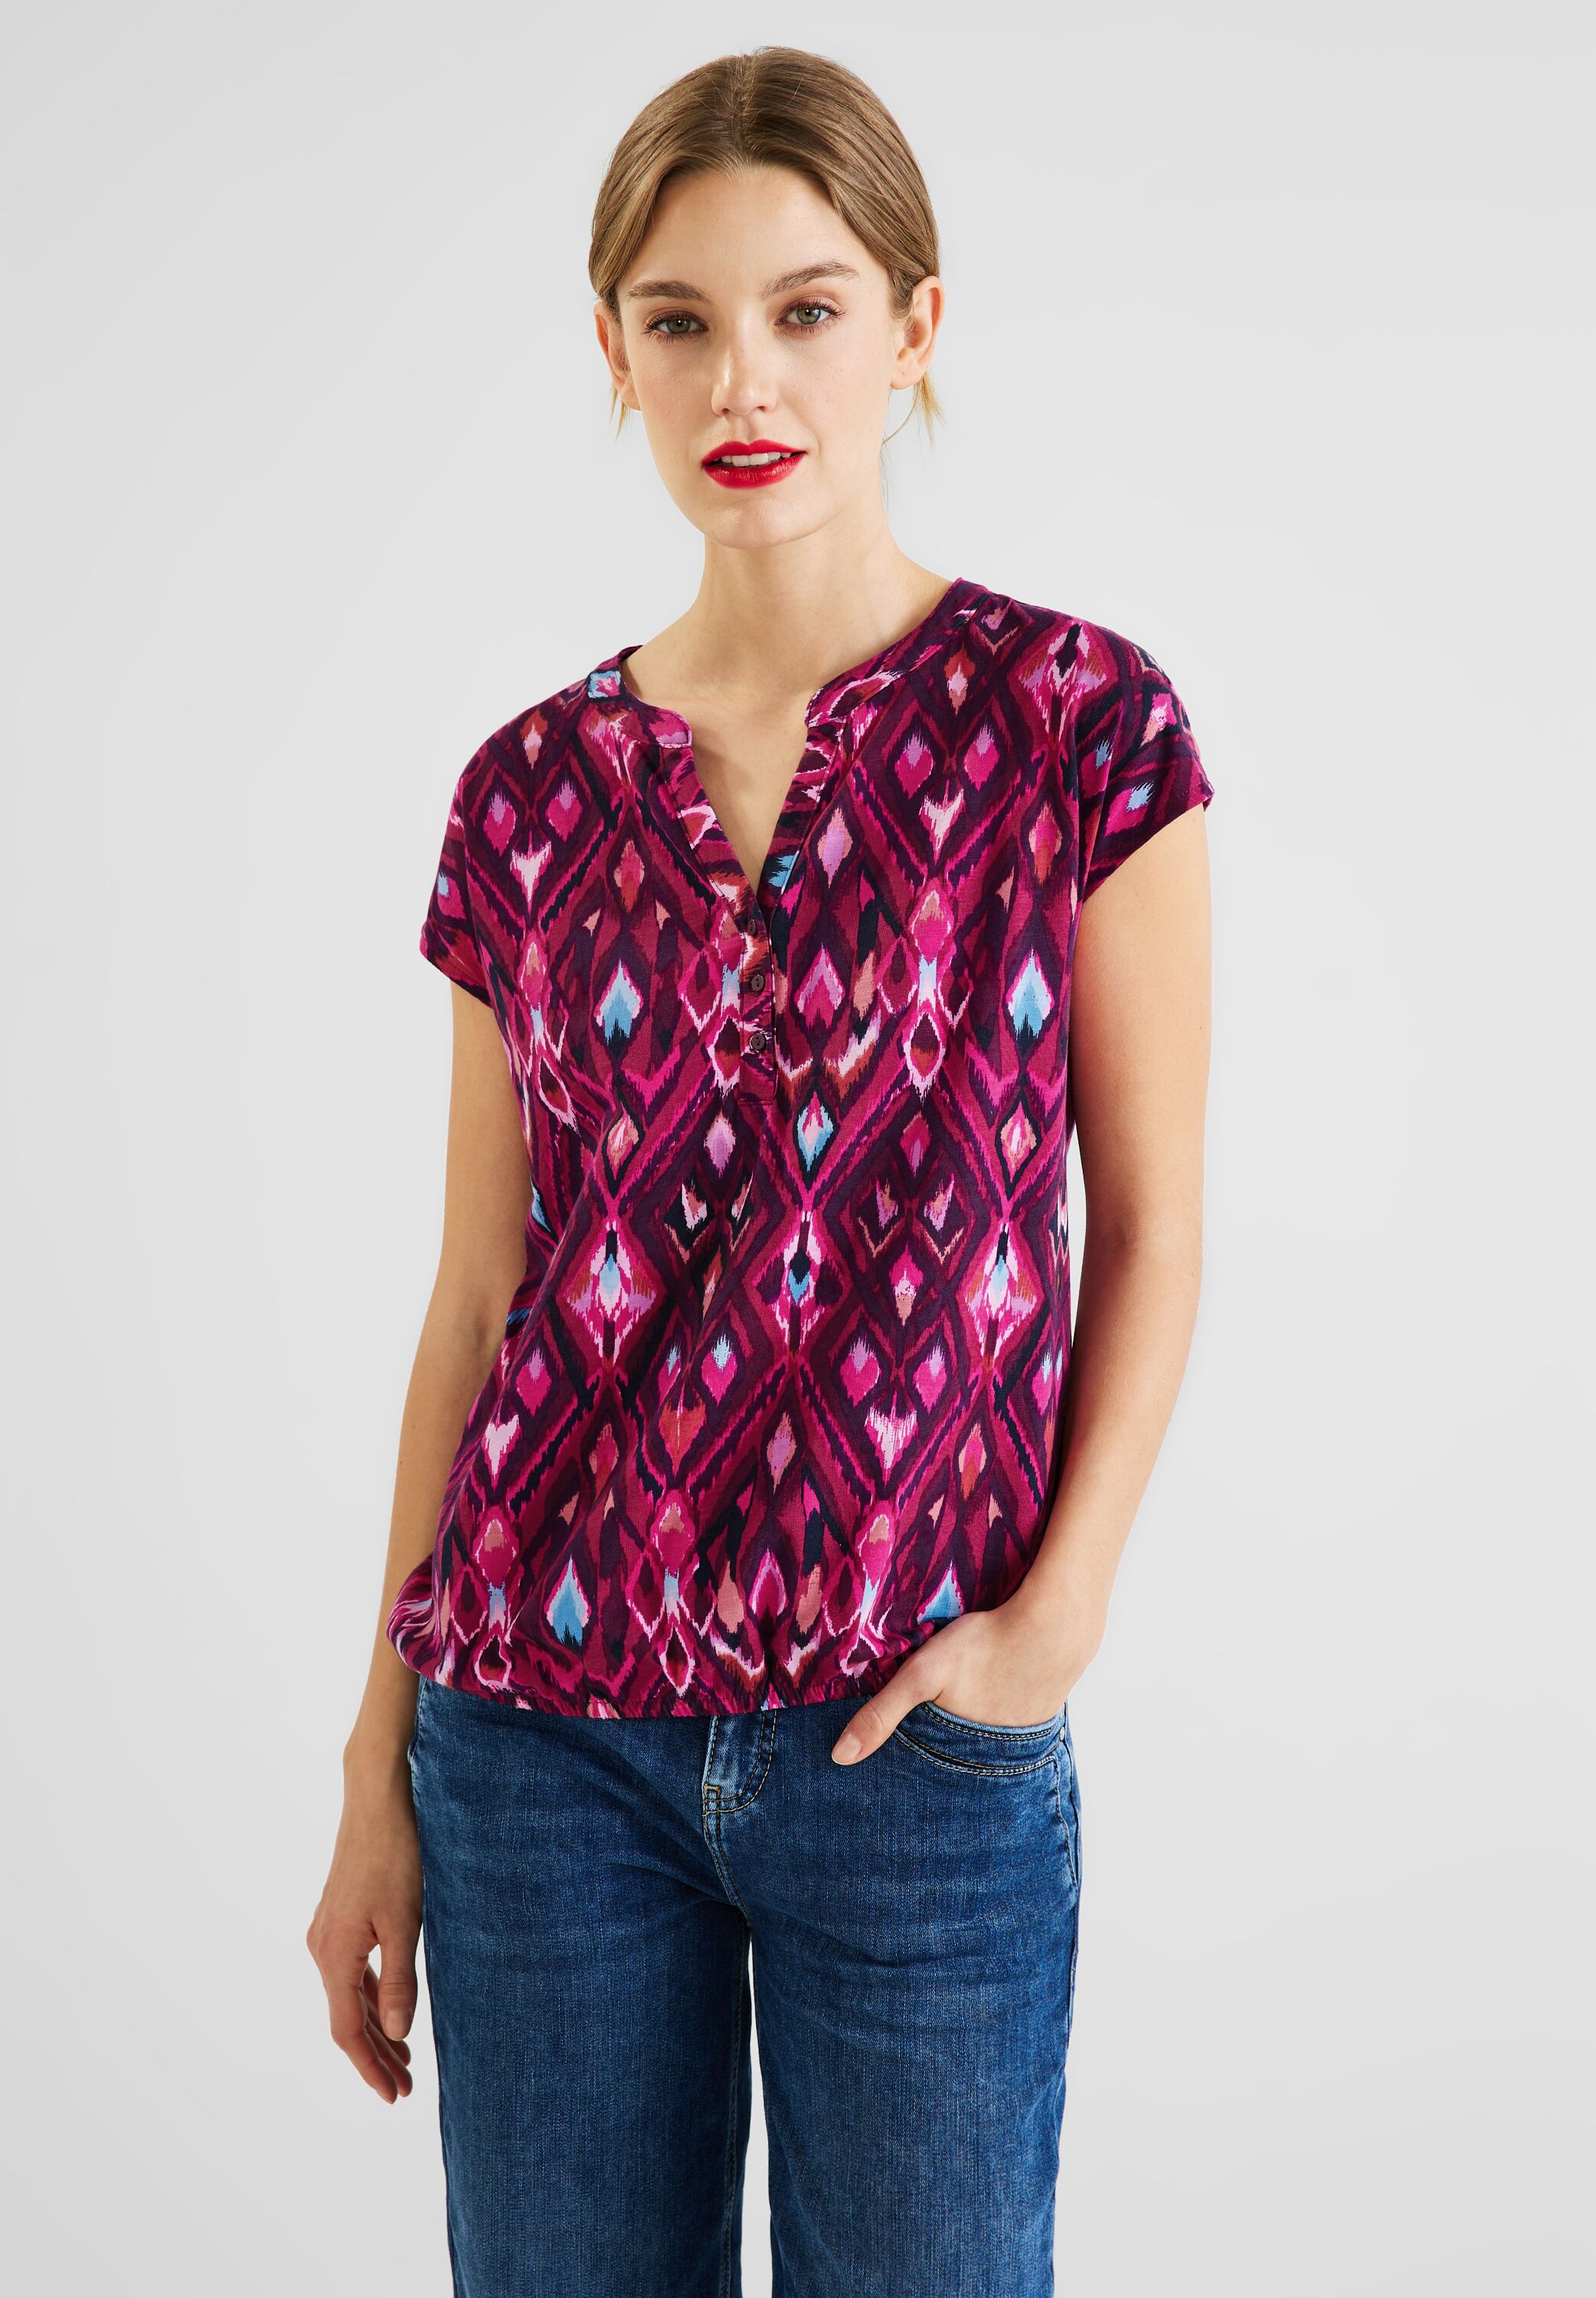 SALE Tamed im T-Shirt - reduziert Berry Street Mode in A319605-34886 One CONCEPT